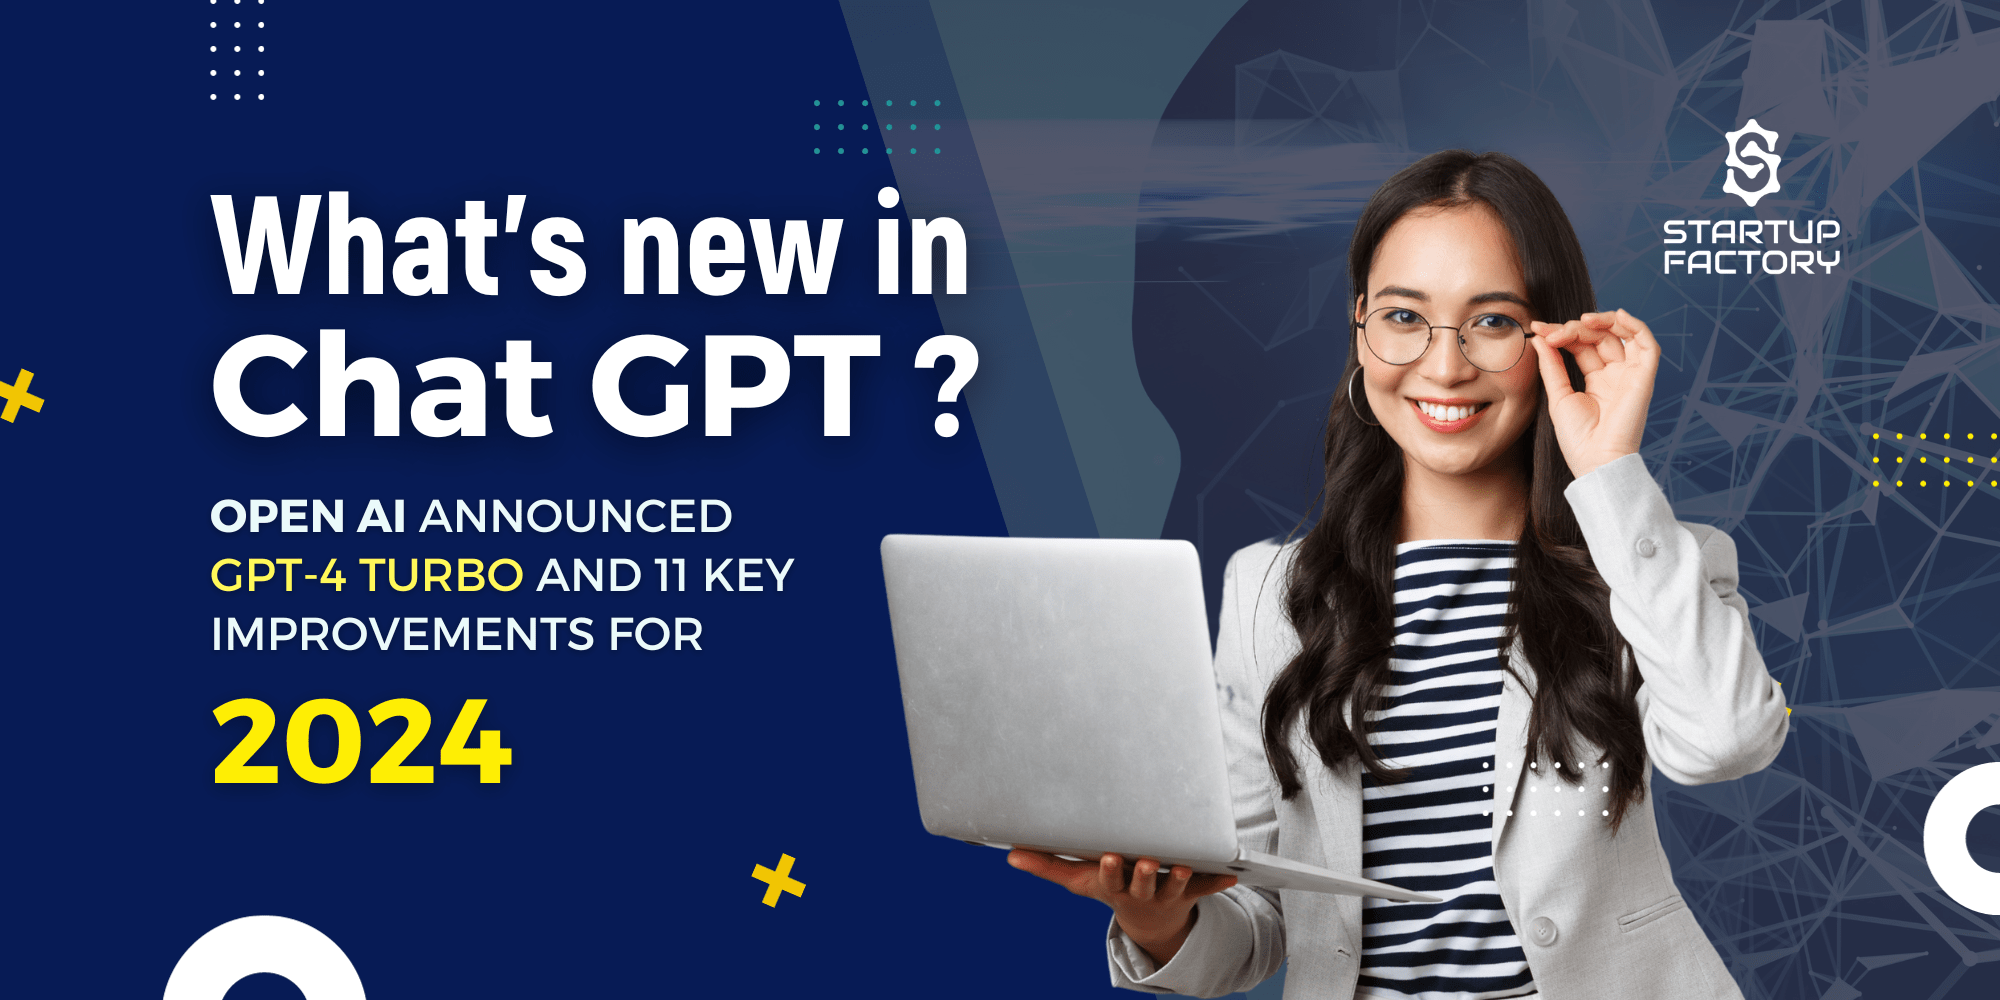 What’s new in Chat GPT for 2024? «GPT-4 Turbo and 11 key improvements»